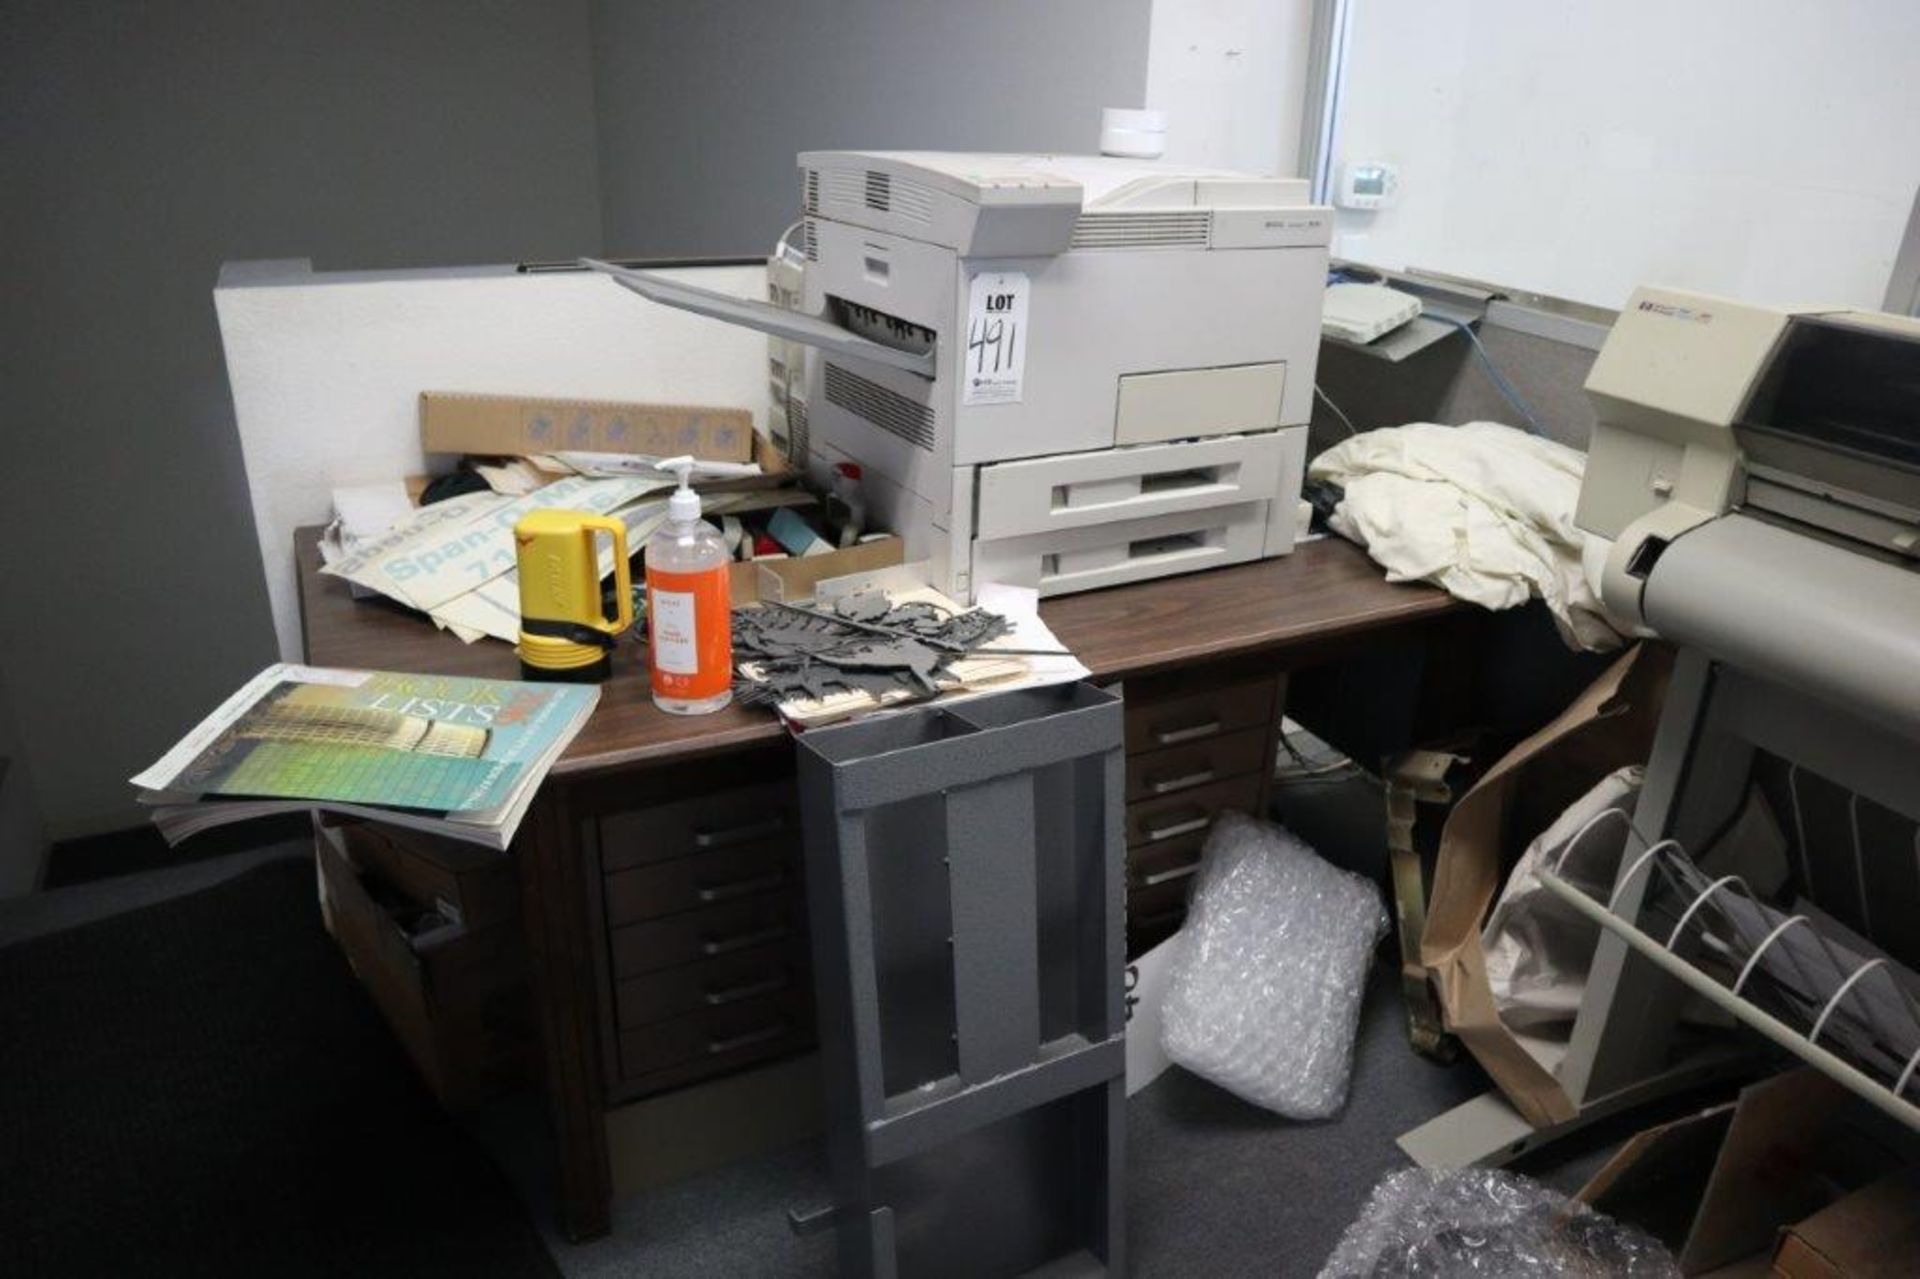 UPSTAIRS PRINTING AREA TO INCLUDE BUT NOT LIMITED TO: (1) HP LASERJET 8000, (1) HP DESIGNJET